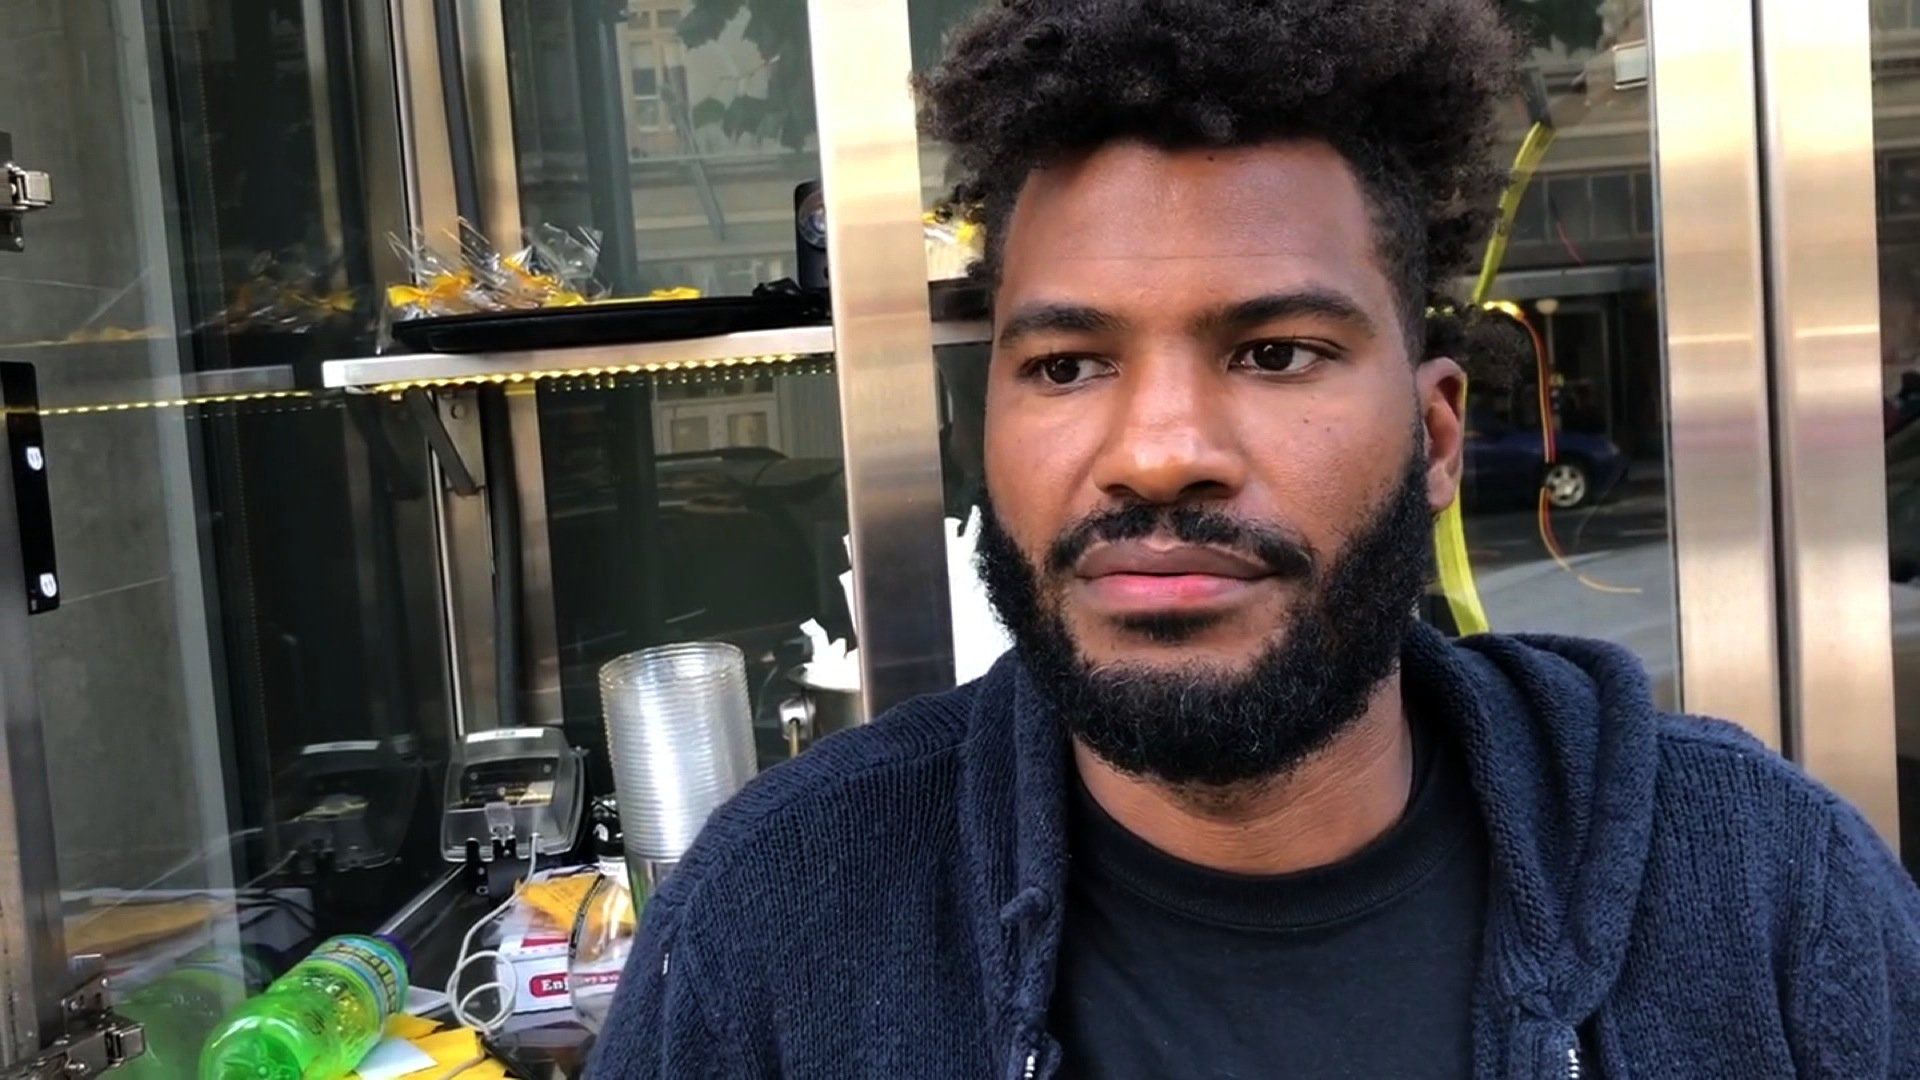 Police called on black man opening his own business